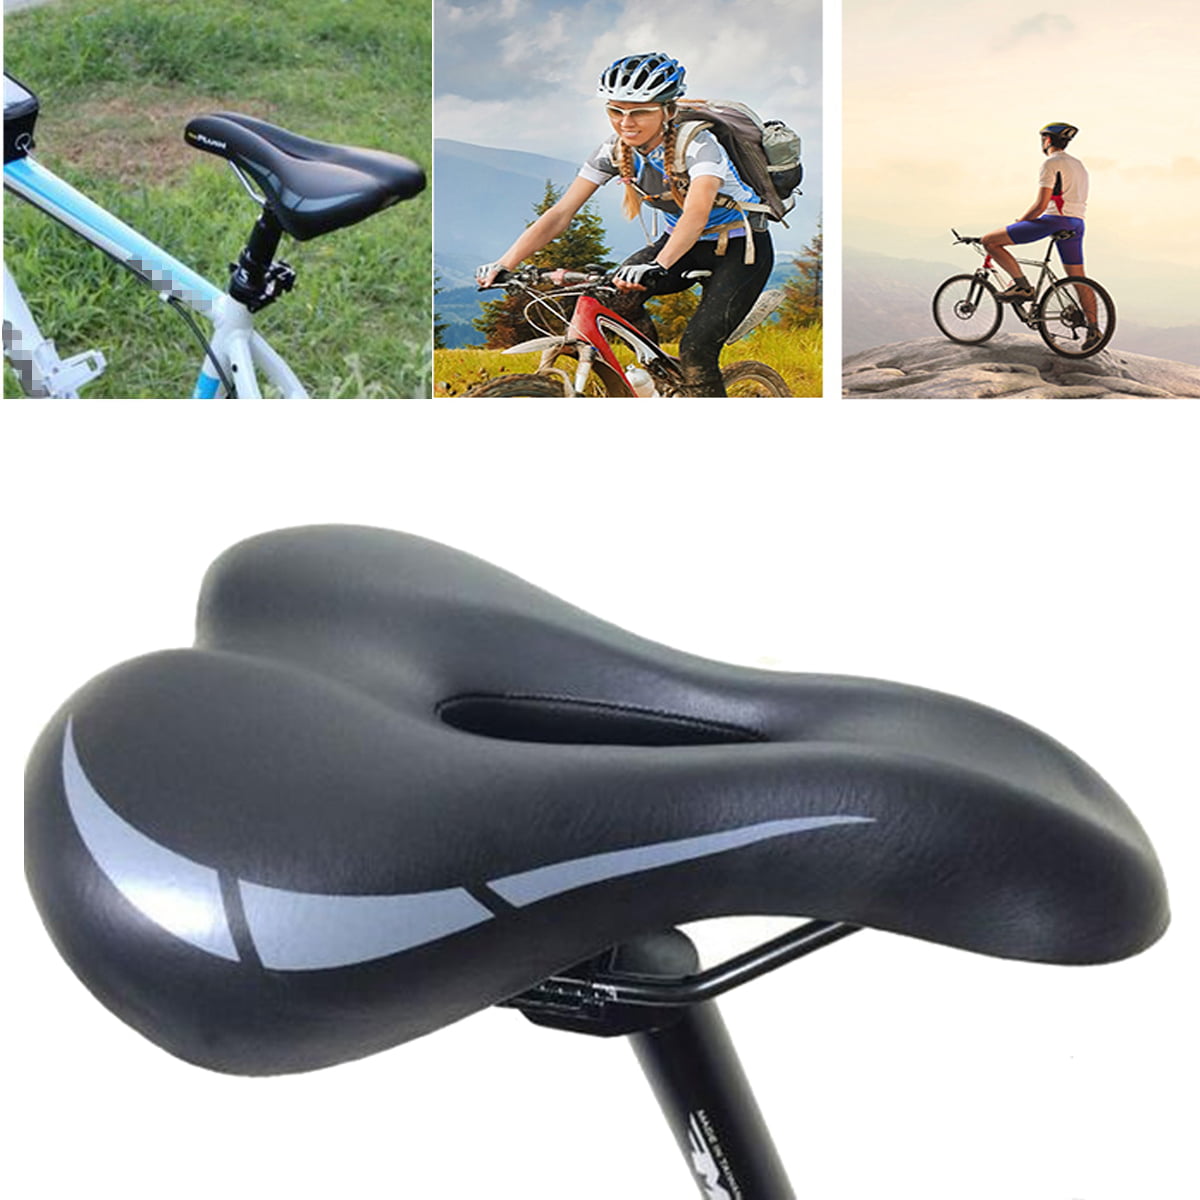 PU Gel Bicycle MTB Saddle Soft Seat For Road Mountain Bike Comfort Replacement 